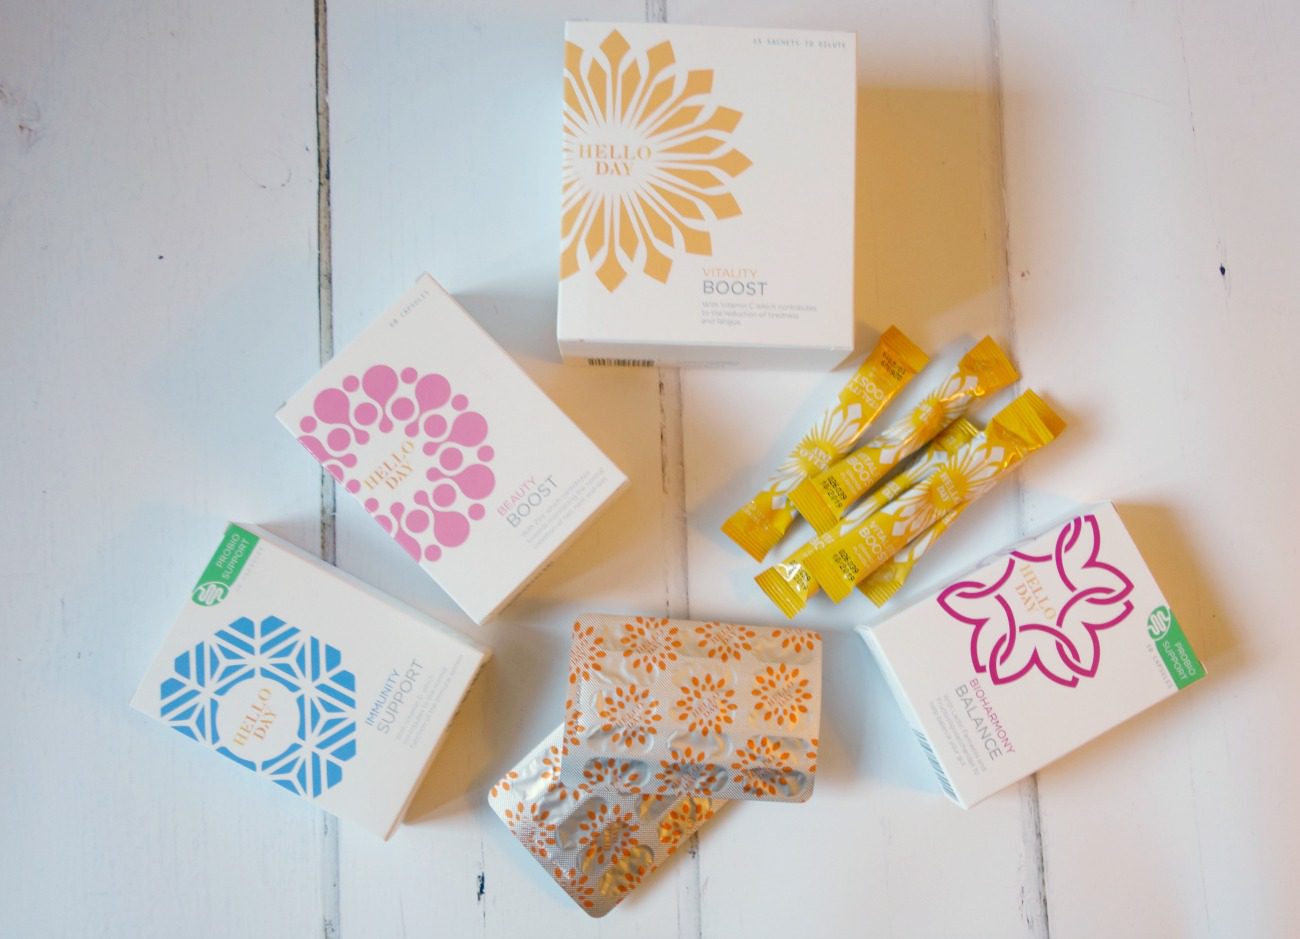 Hello Day Winter Wellbeing Box Review